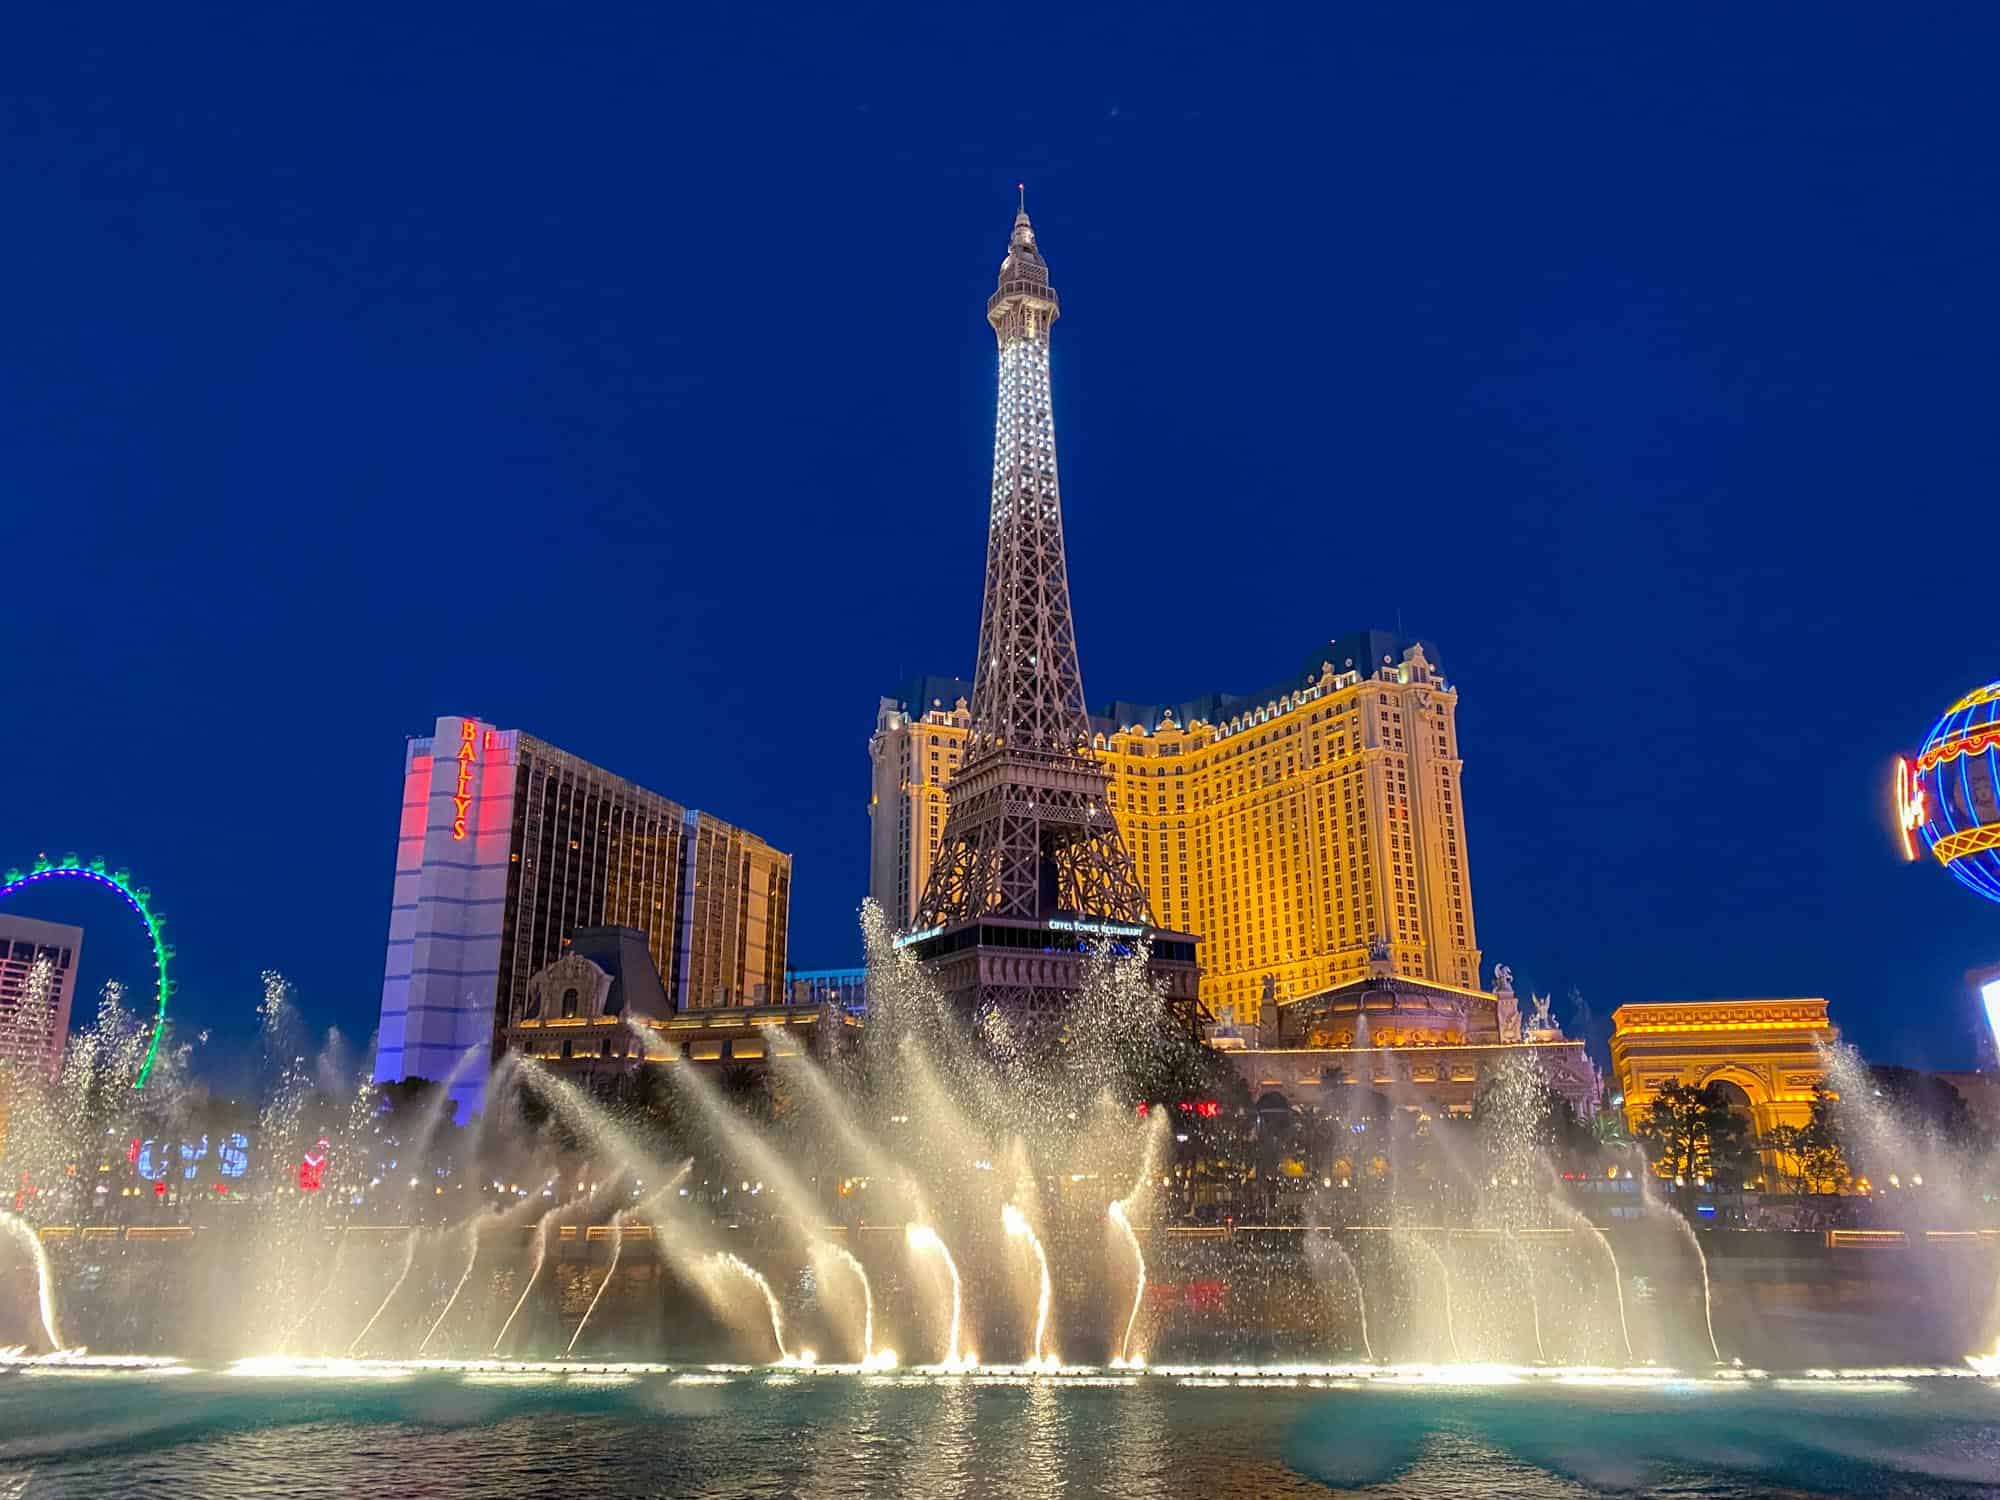 One night in Las Vegas – what do you do?